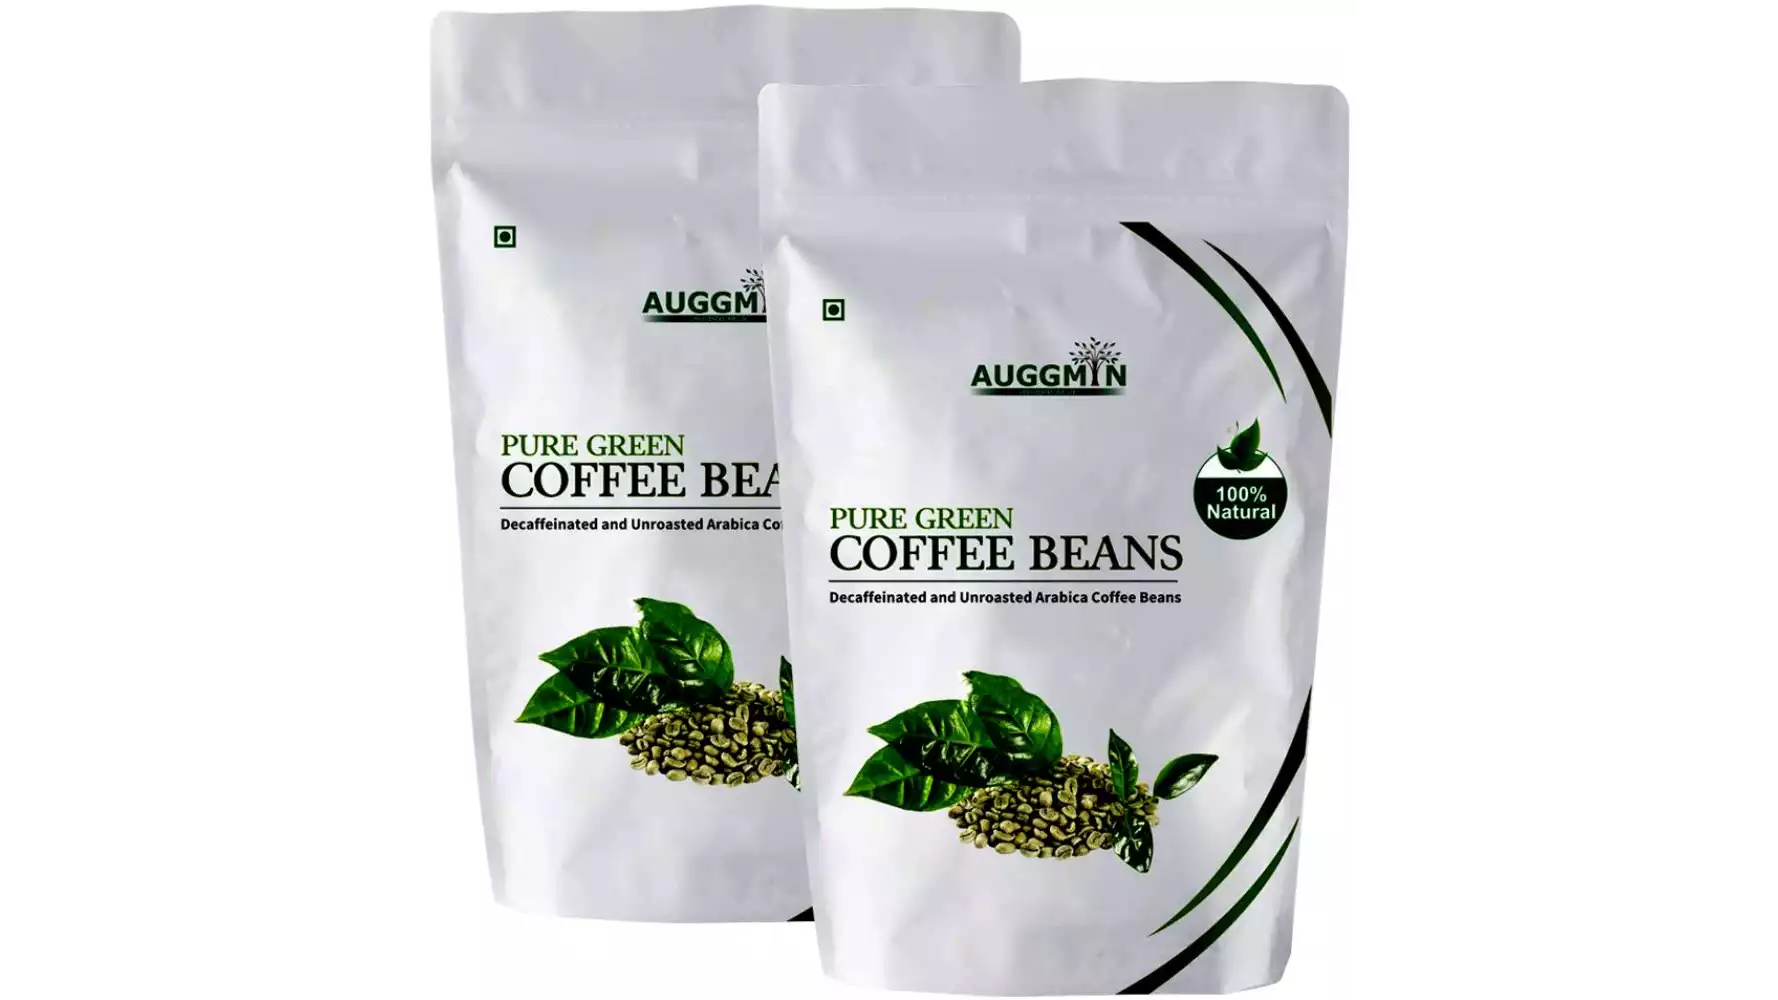 Auggmin Green Coffee Beans For Weight Loss (200g, Pack of 2)